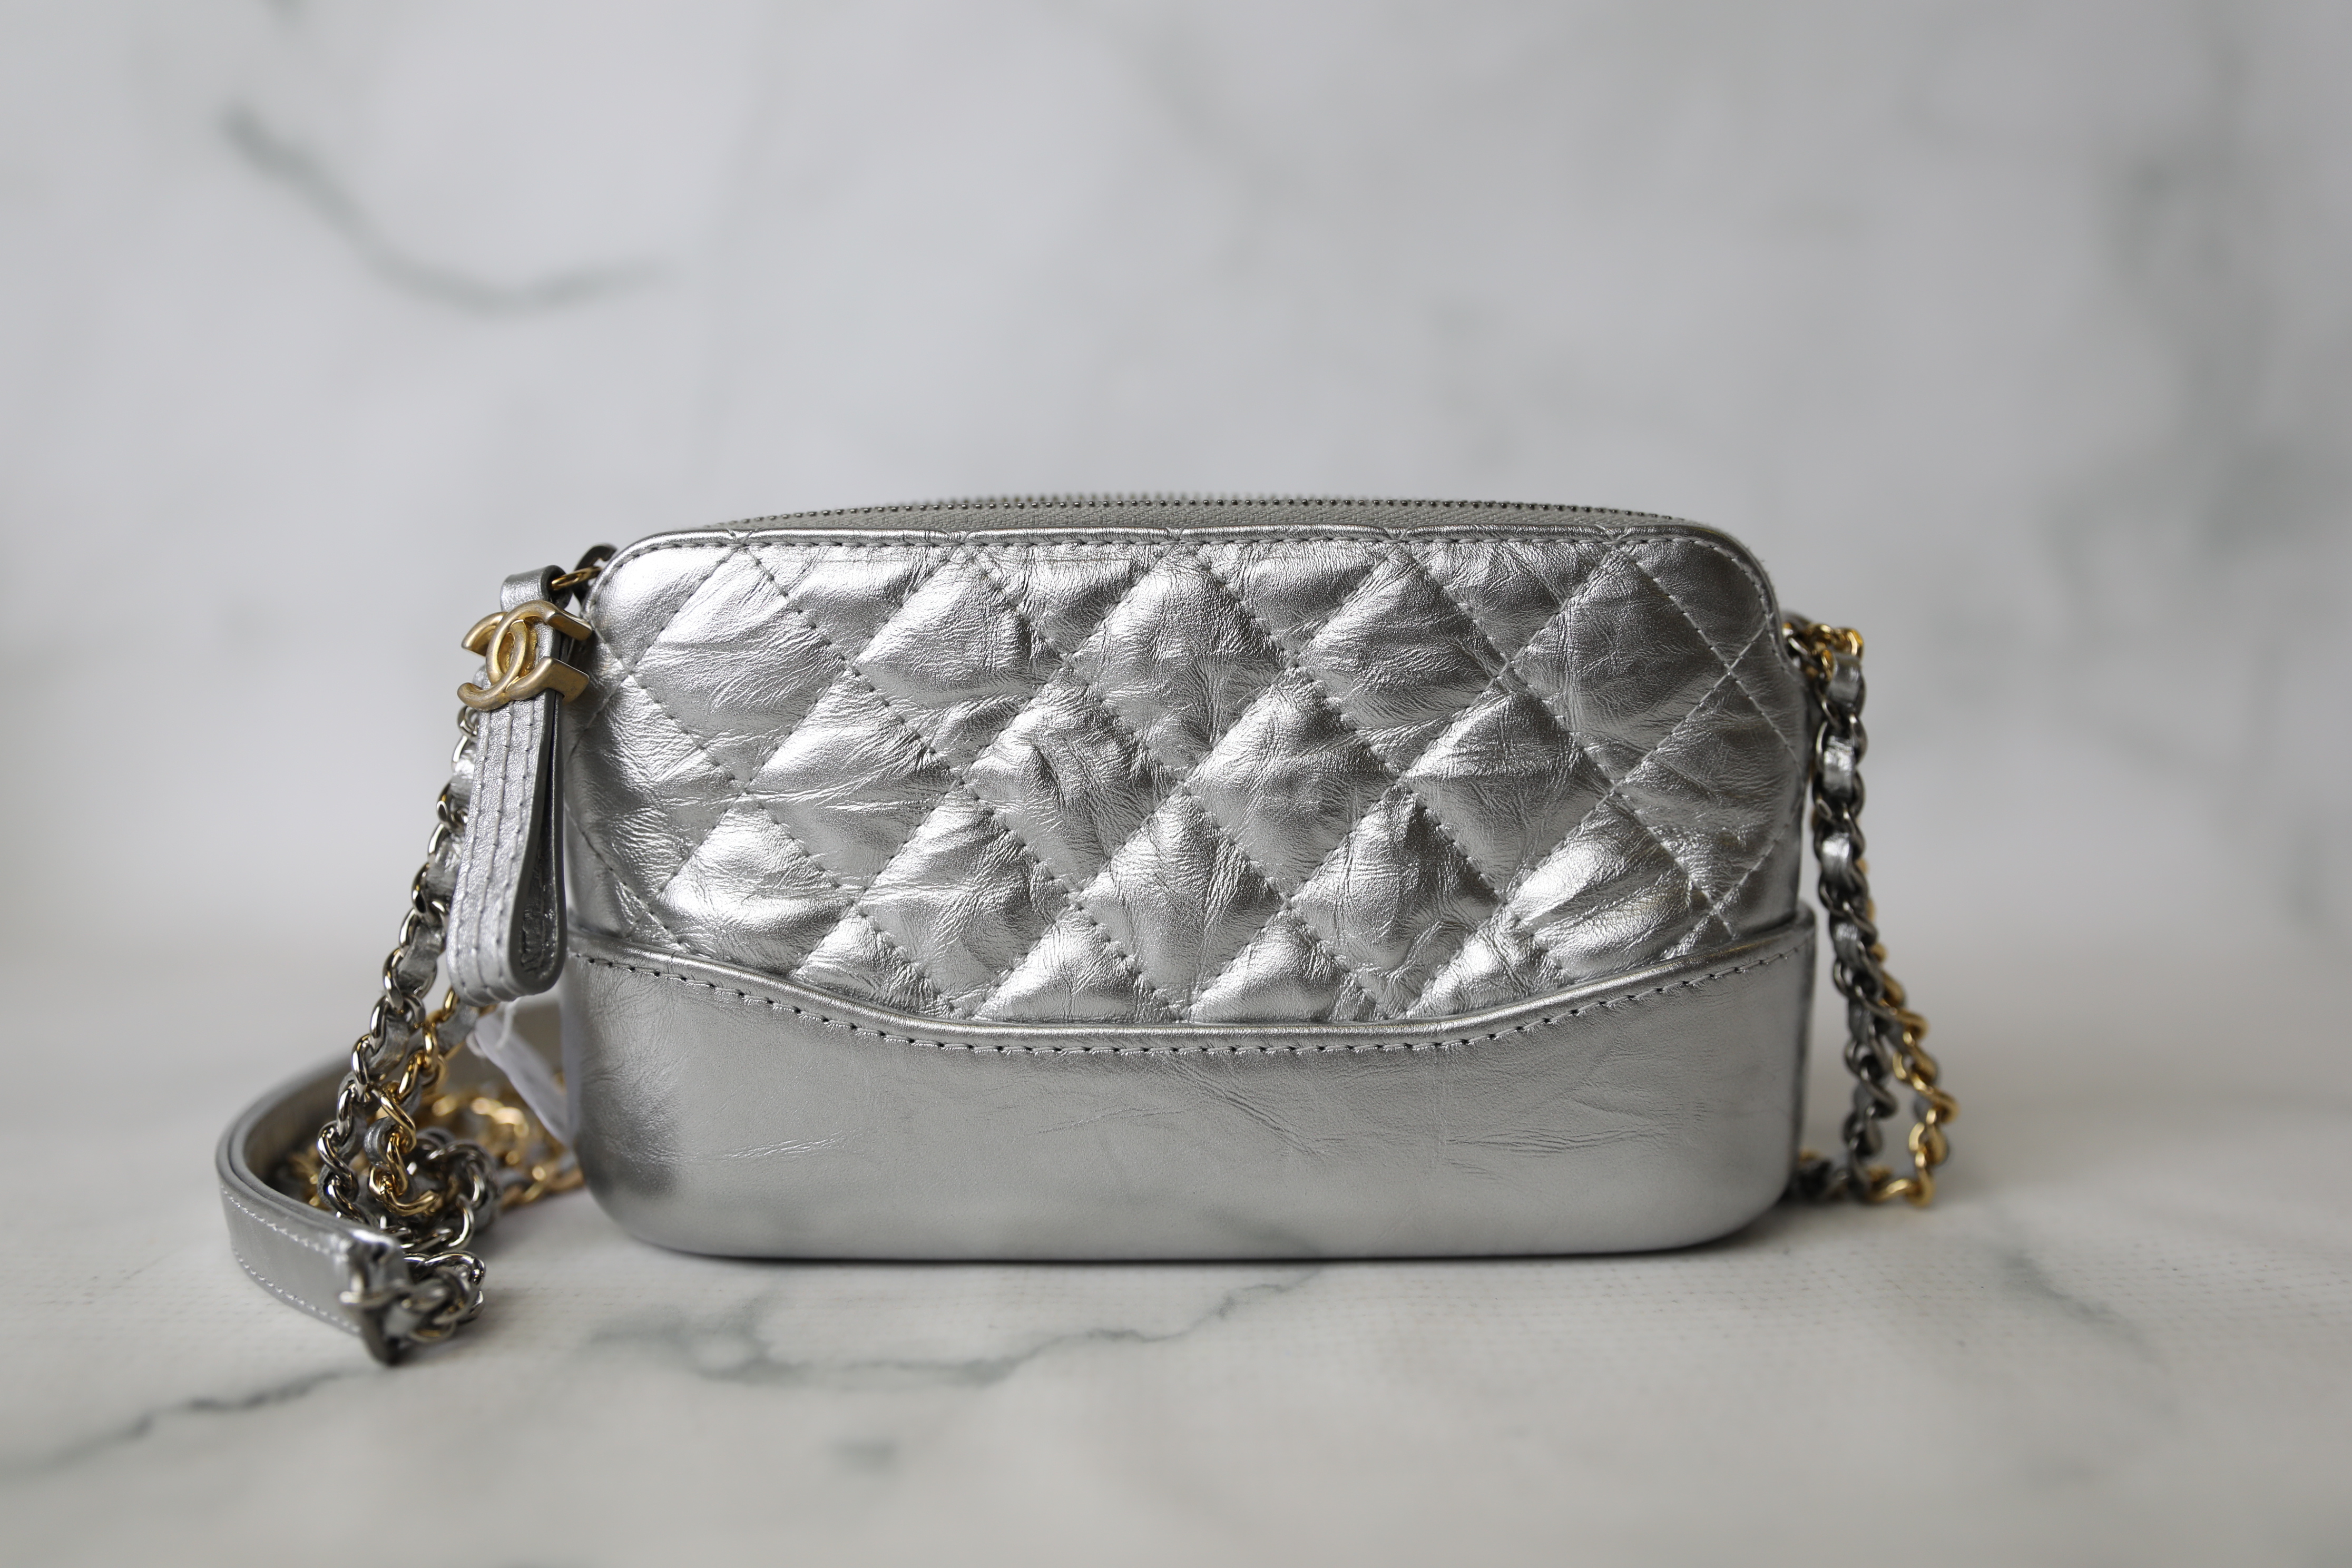 Chanel Gabrielle Clutch on a Chain, Metallic Crumbled Lambskin with Mixed  Hardware, Preowned in Box WA001 - Julia Rose Boston